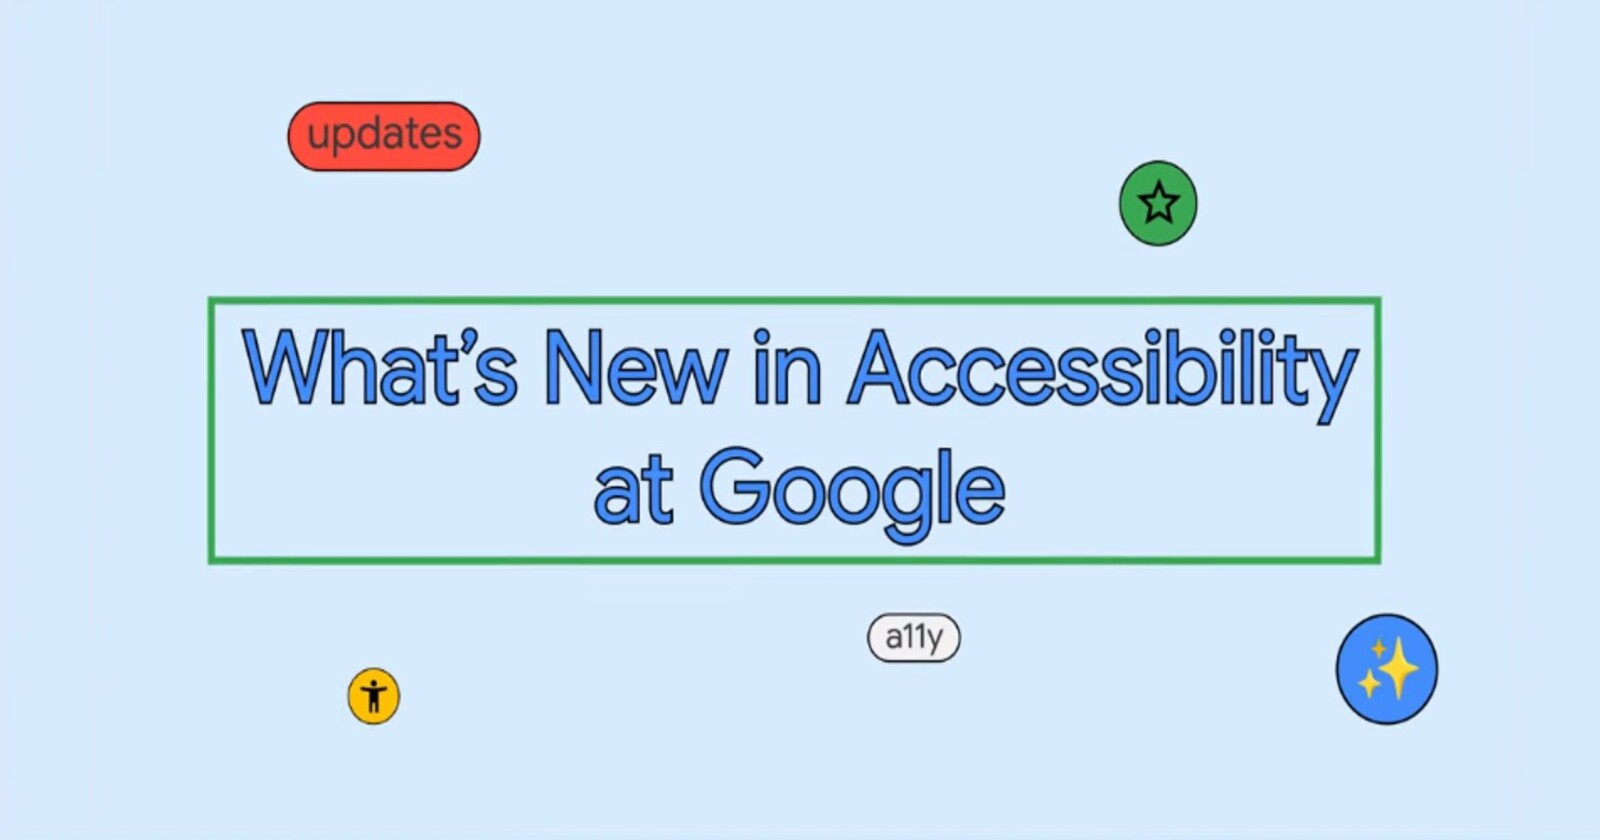 Google's latest 'What’s New in Google Accessibility' video shows off accessibility features on Pixel phones and more